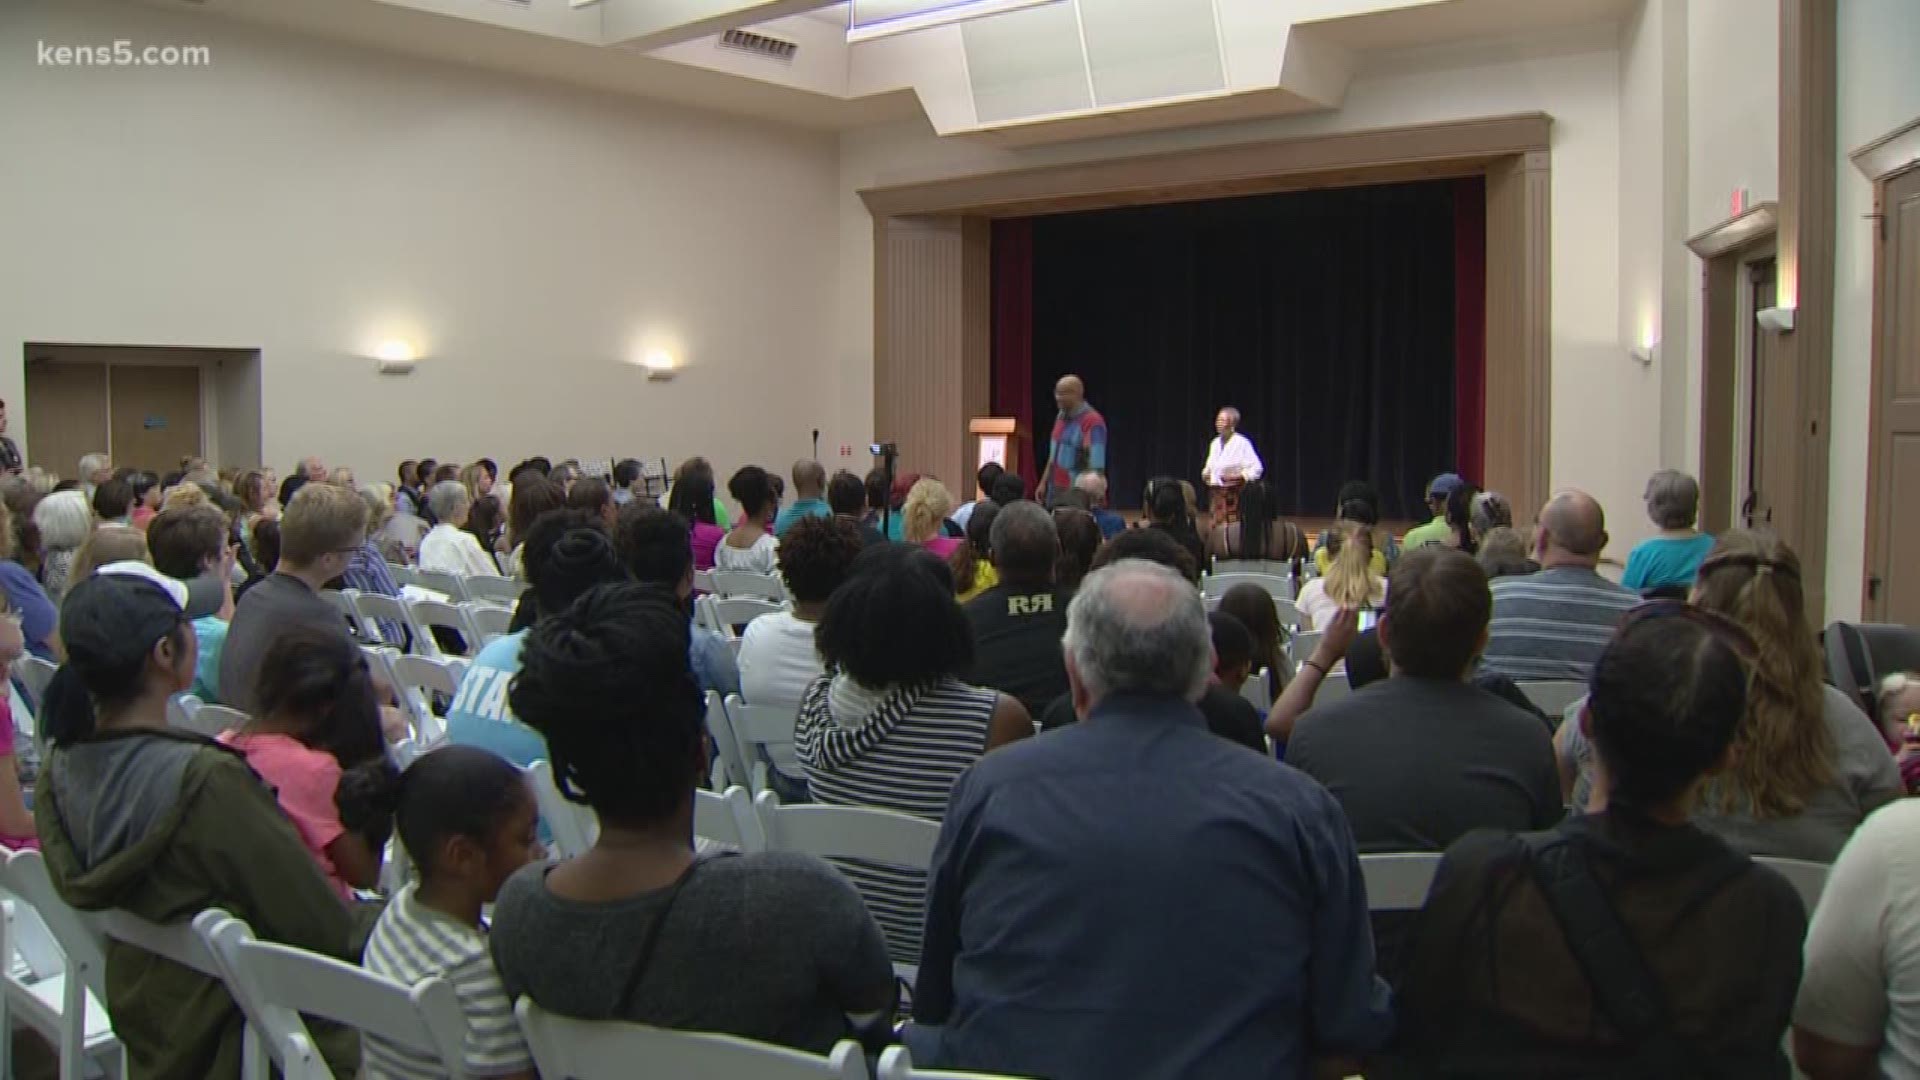 Today, our state celebrated Juneteenth, commemorating when slaves in Texas learned of the Emancipation Proclamation. Eyewitness News reporter Roxie Bustamante has more.